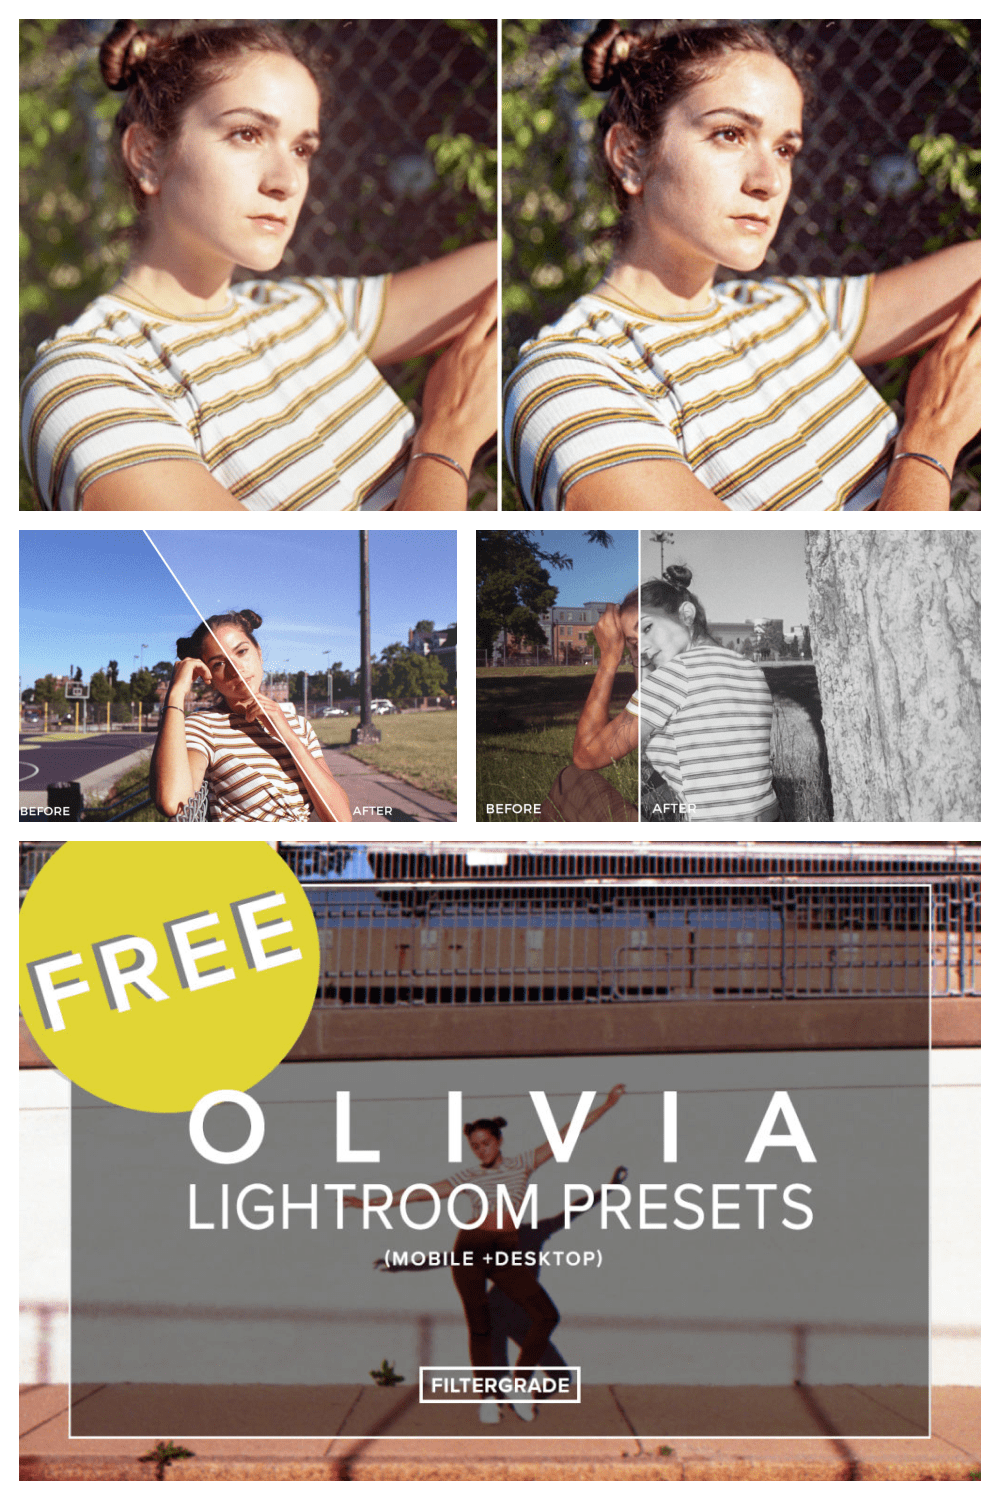 Manipulate these presets with your photos to create cool, film-like, glow effects for your portraits.